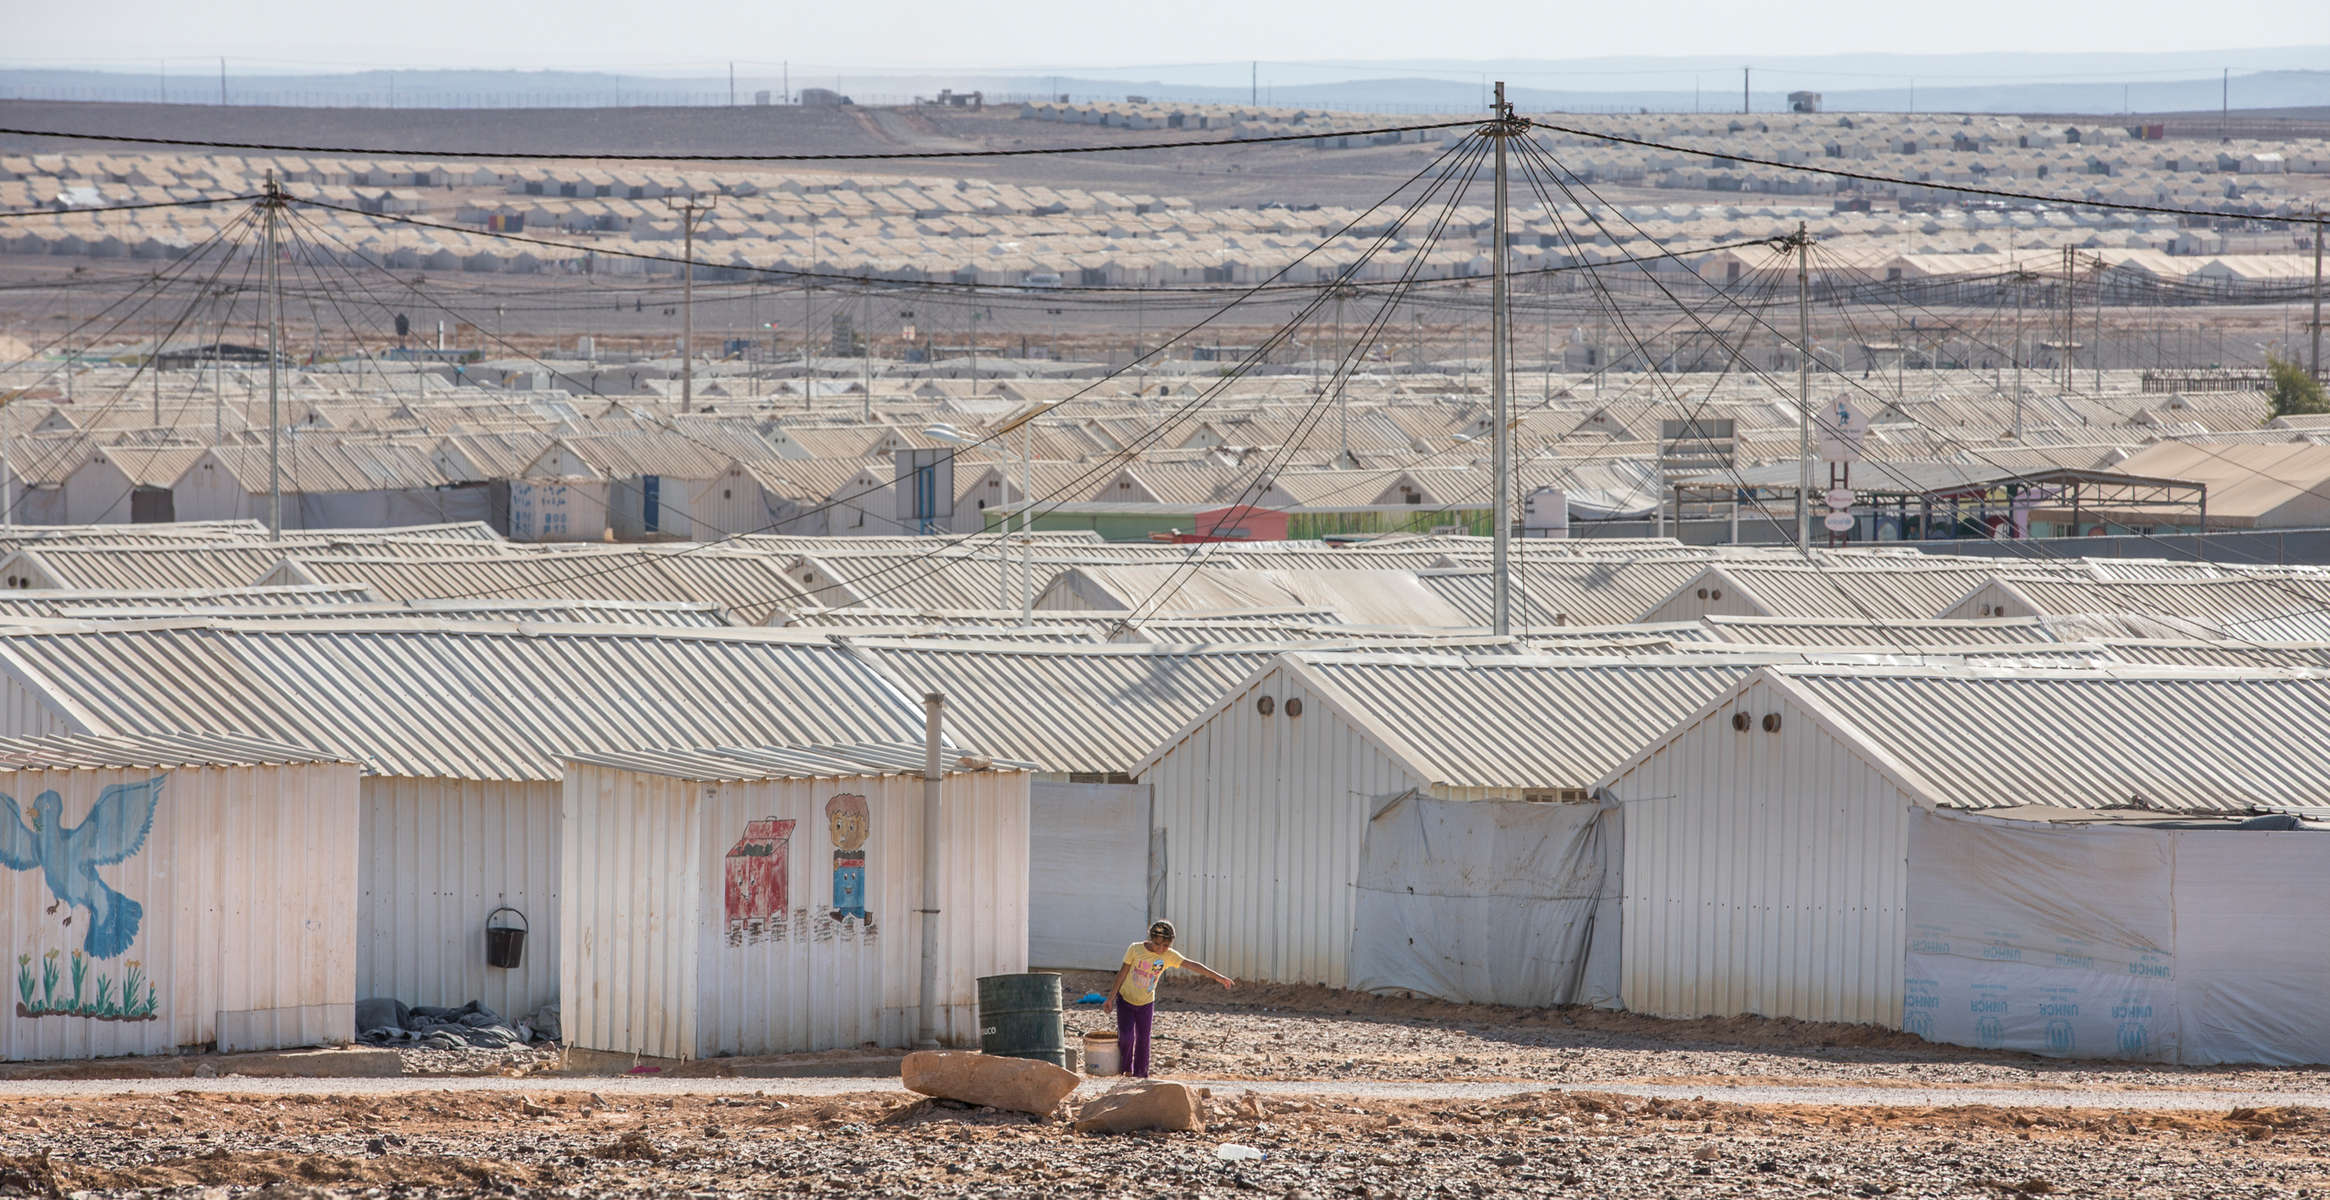 A boy draws water from a well at Azraq refugee camp. The camp first opened in April 2014. It houses over 20,000 refugees from the conflict in Syria.